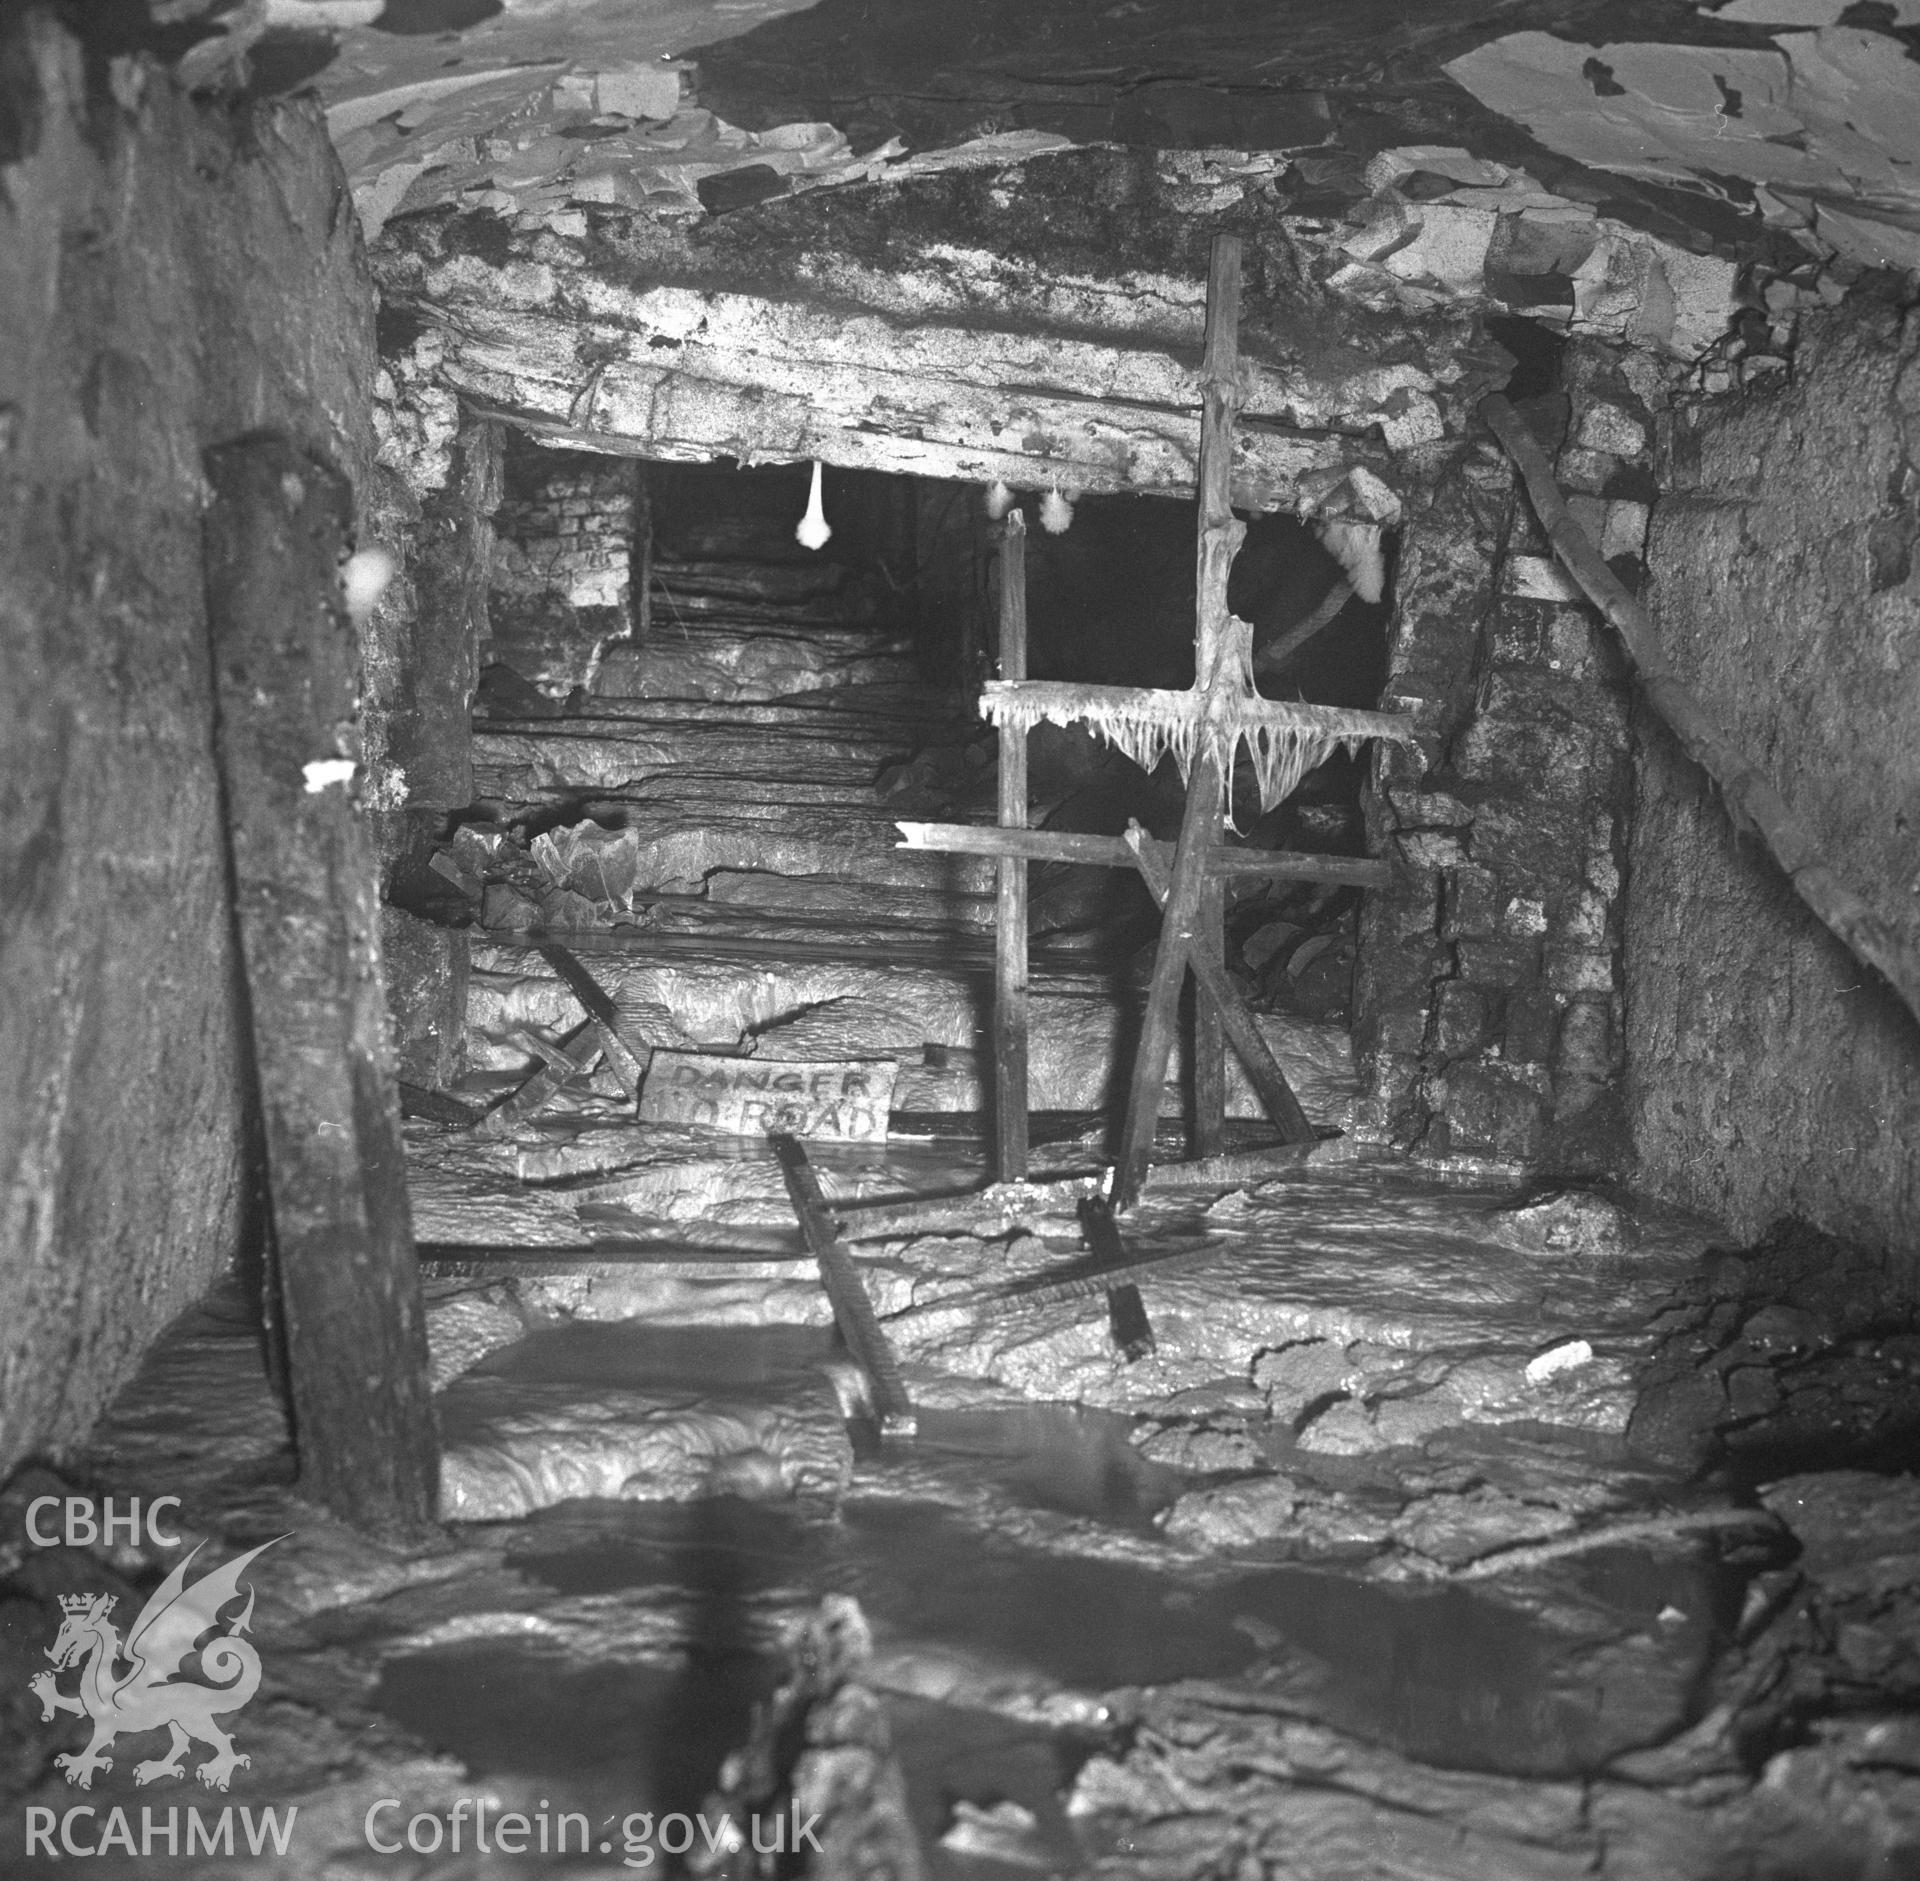 Digital copy of an acetate negative showing access to underground stables in the Horn Coal at Big Pit, from the John Cornwell Collection.